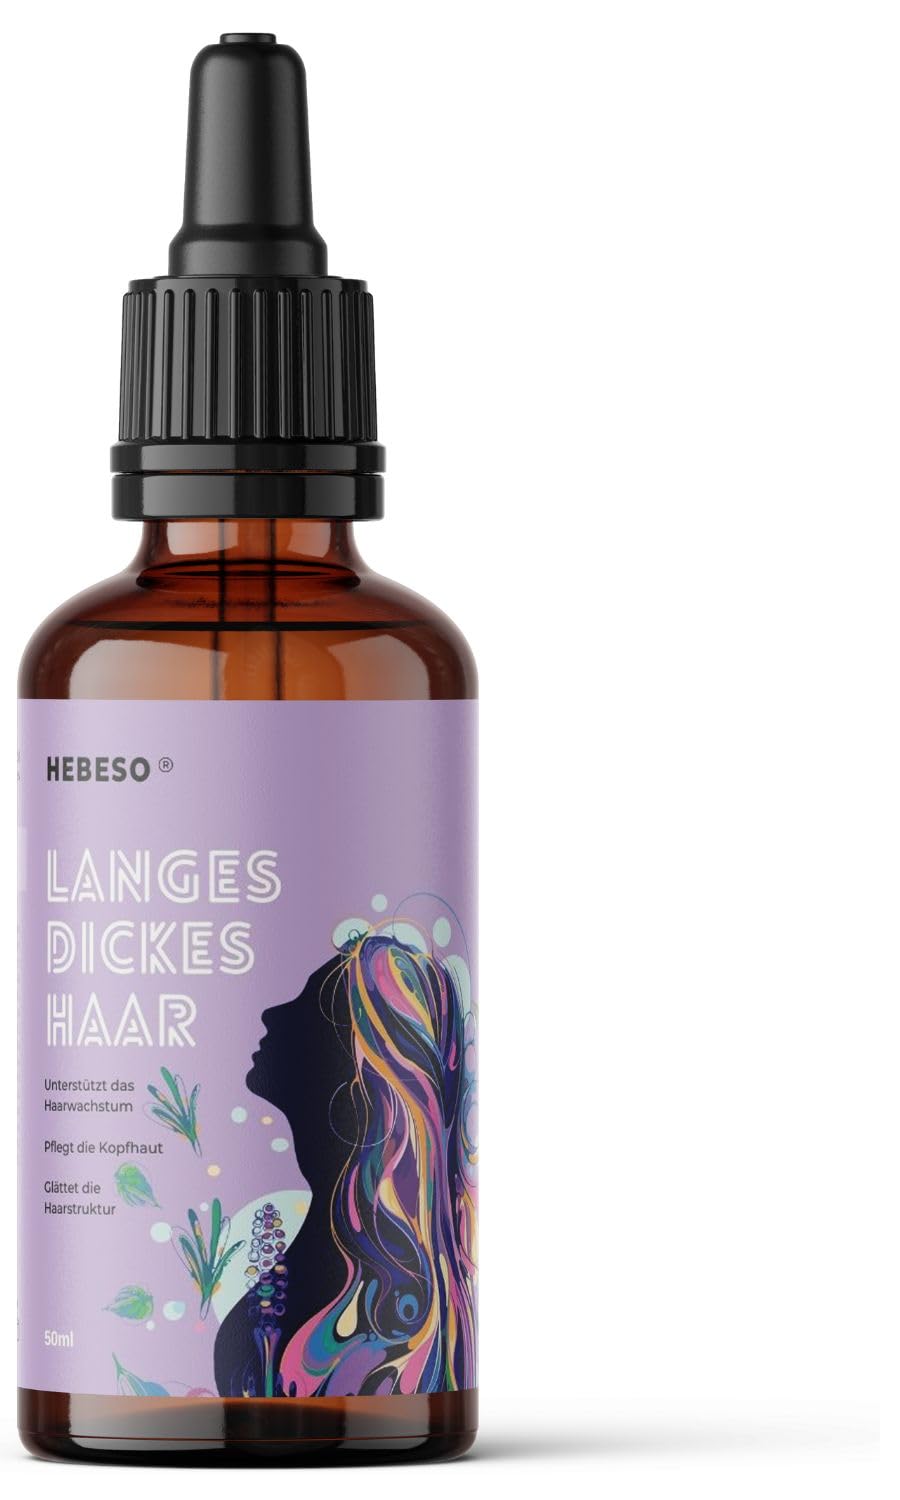 HEBESO® Long Thick Hair 50 ml Rosemary Mint Hair Growth Oil with Nettle, Horsetail, Sage, Laurel, Castor, Vitamin E and More, Hair Growth Serum for Healthier Hair